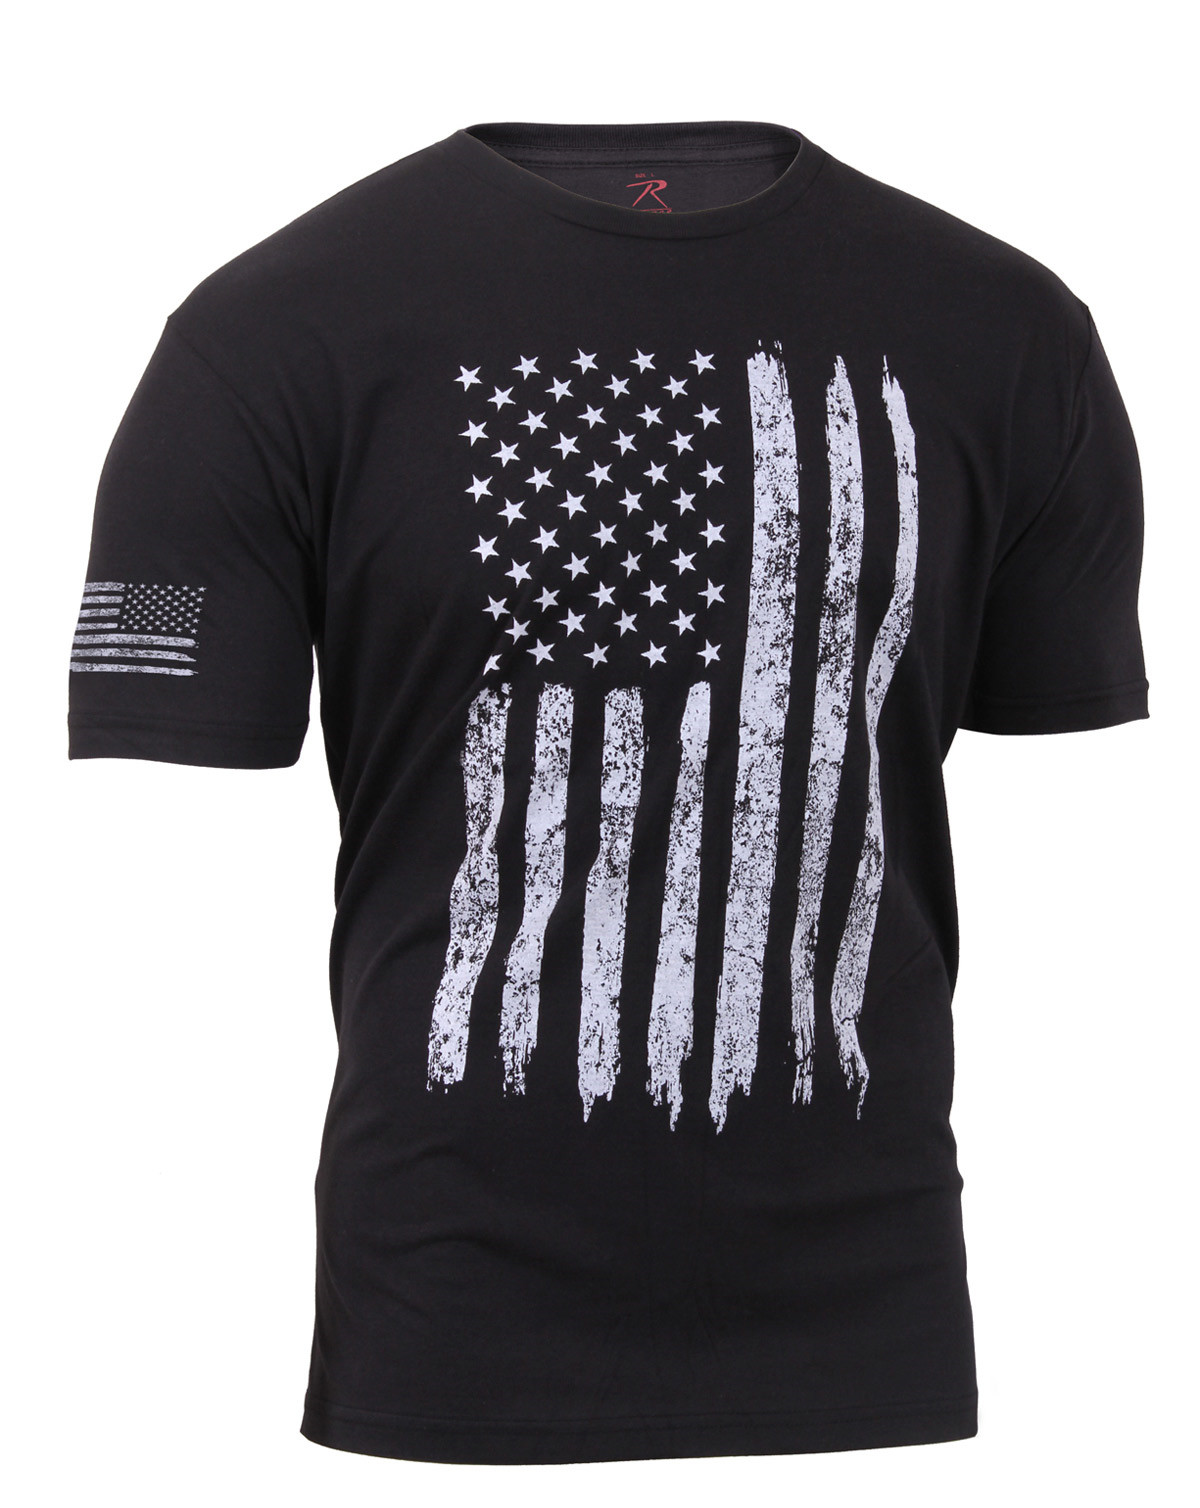 Rothco T-shirt - 'Distressed US Flag', Athletic Fit (Sort, 2XL)